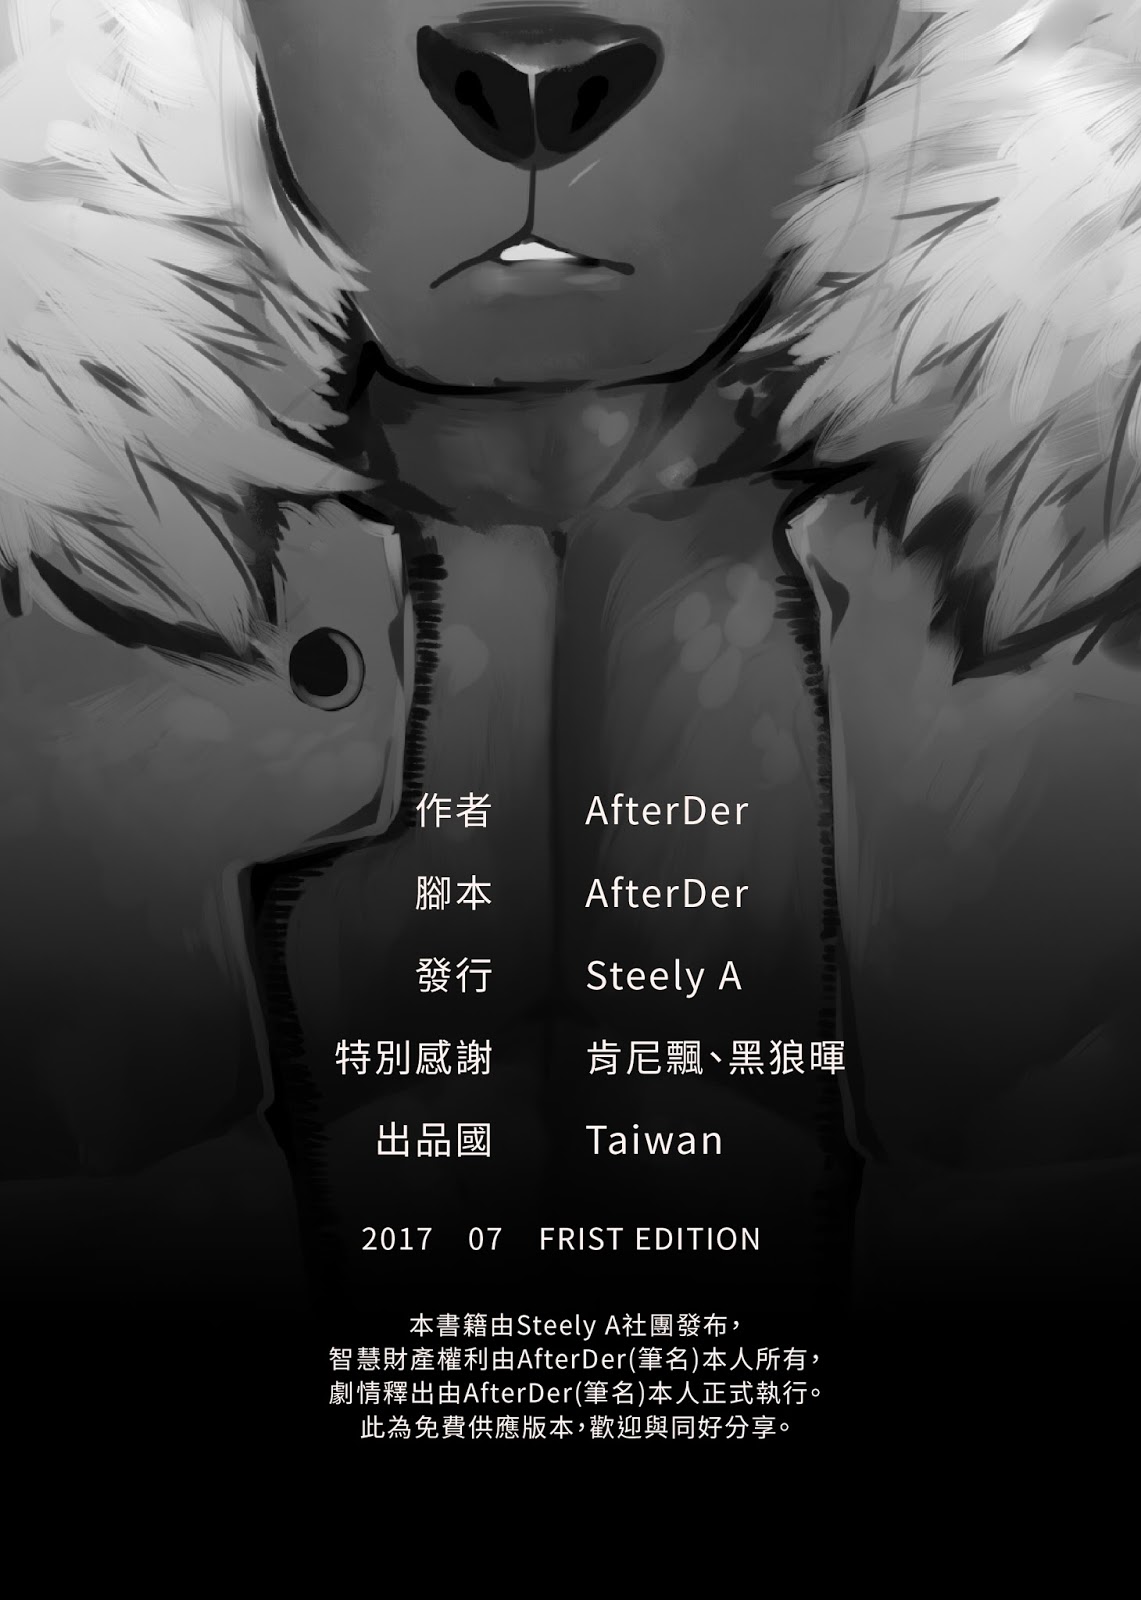 [Steely A (AfterDer)] Xing Leng Gan - Cold Sex [Chinese] [Digital] [Steely A (AfterDer)] 性冷感 [中国語] [DL版]